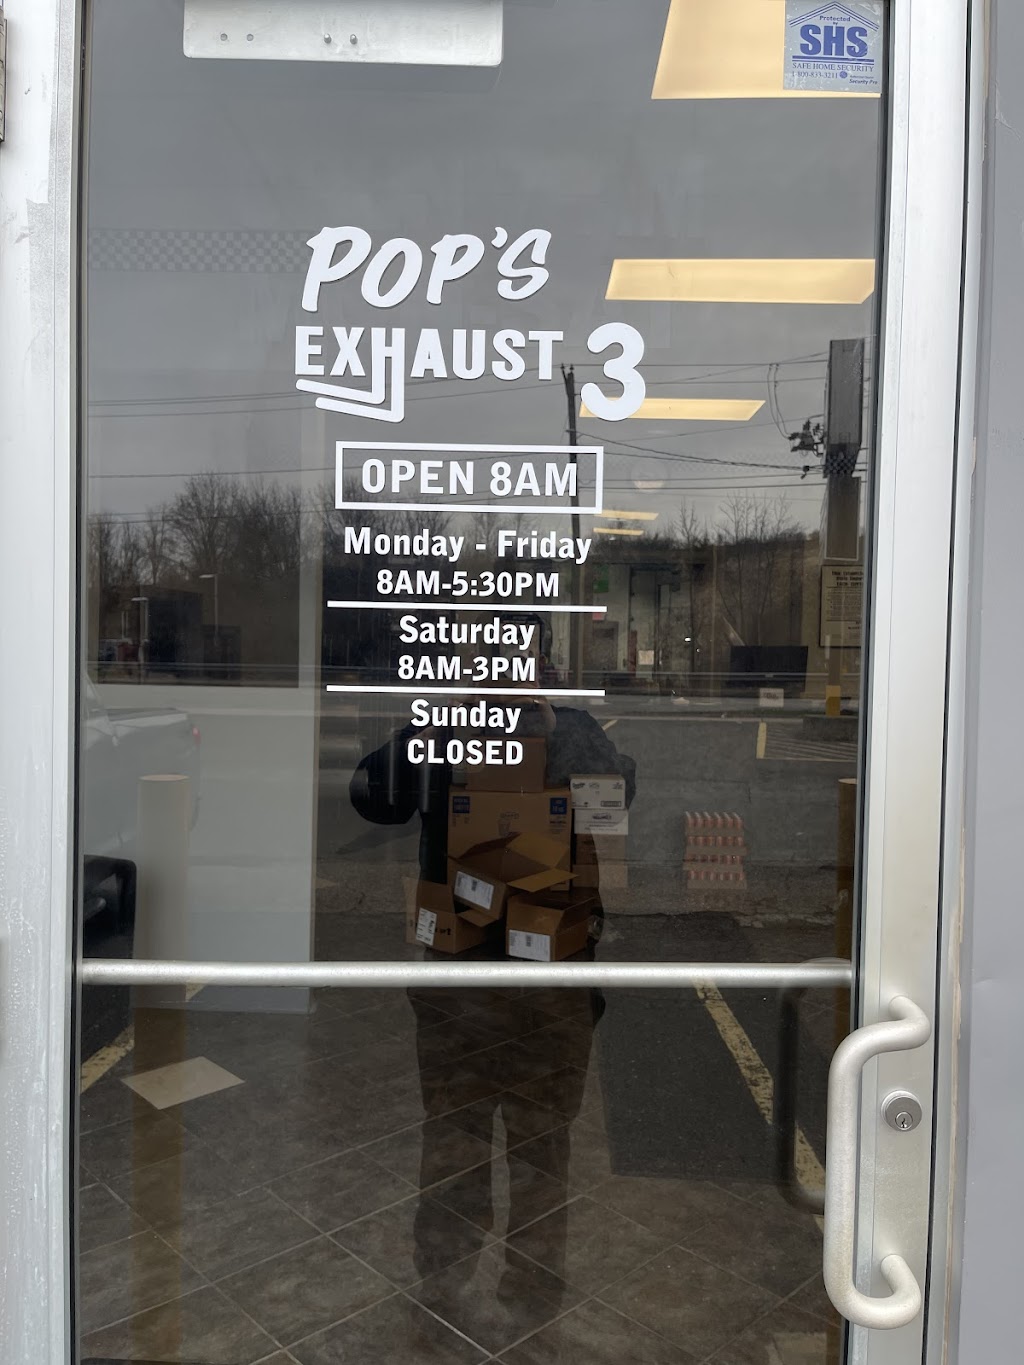 Pops Exhaust 3 | 512 Washington St, Middletown, CT 06457 | Phone: (860) 894-2252